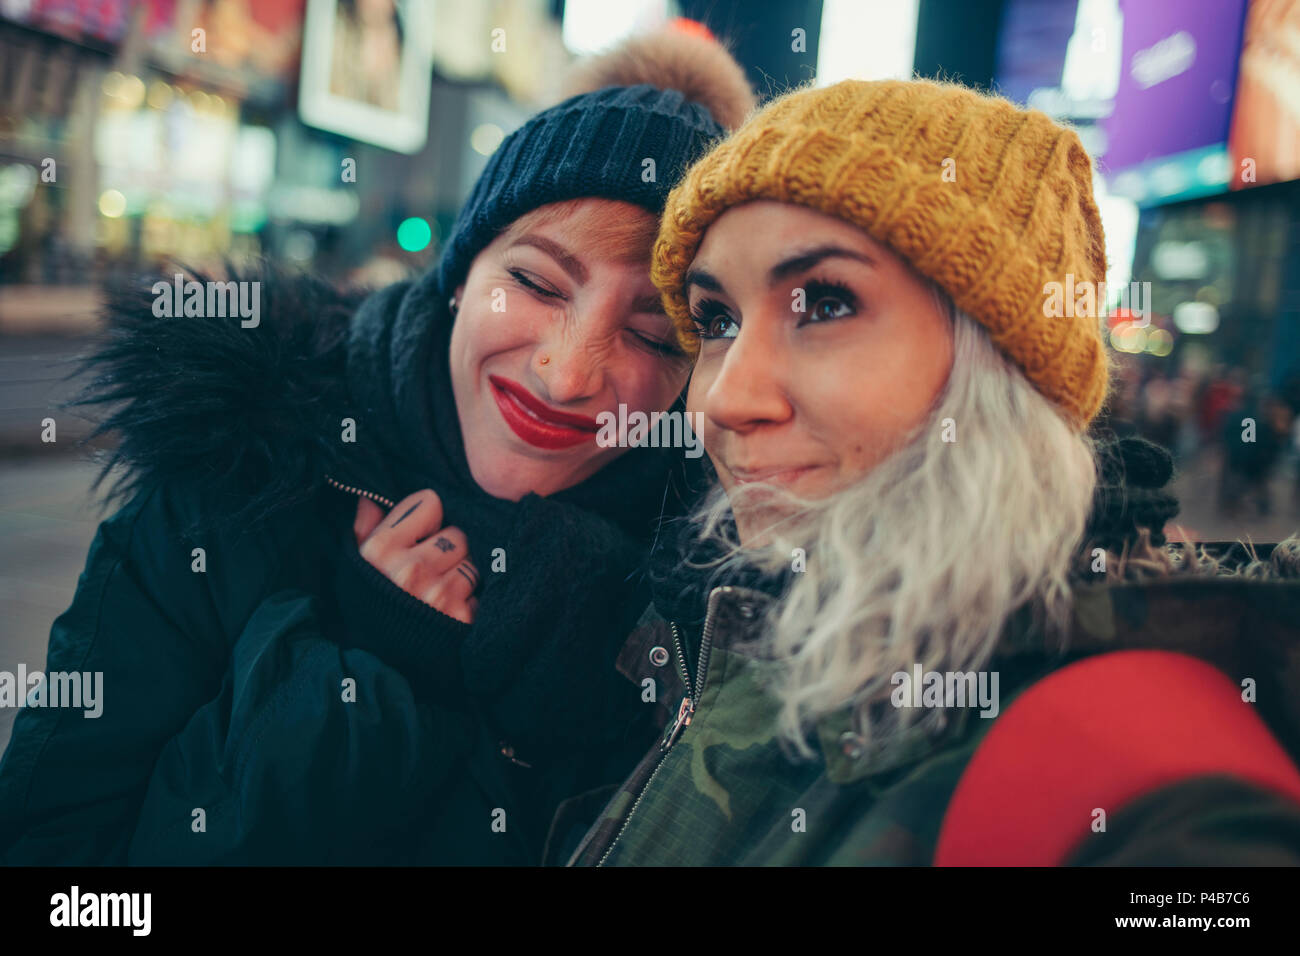 Two girlfriends on times square new york Stock Photo